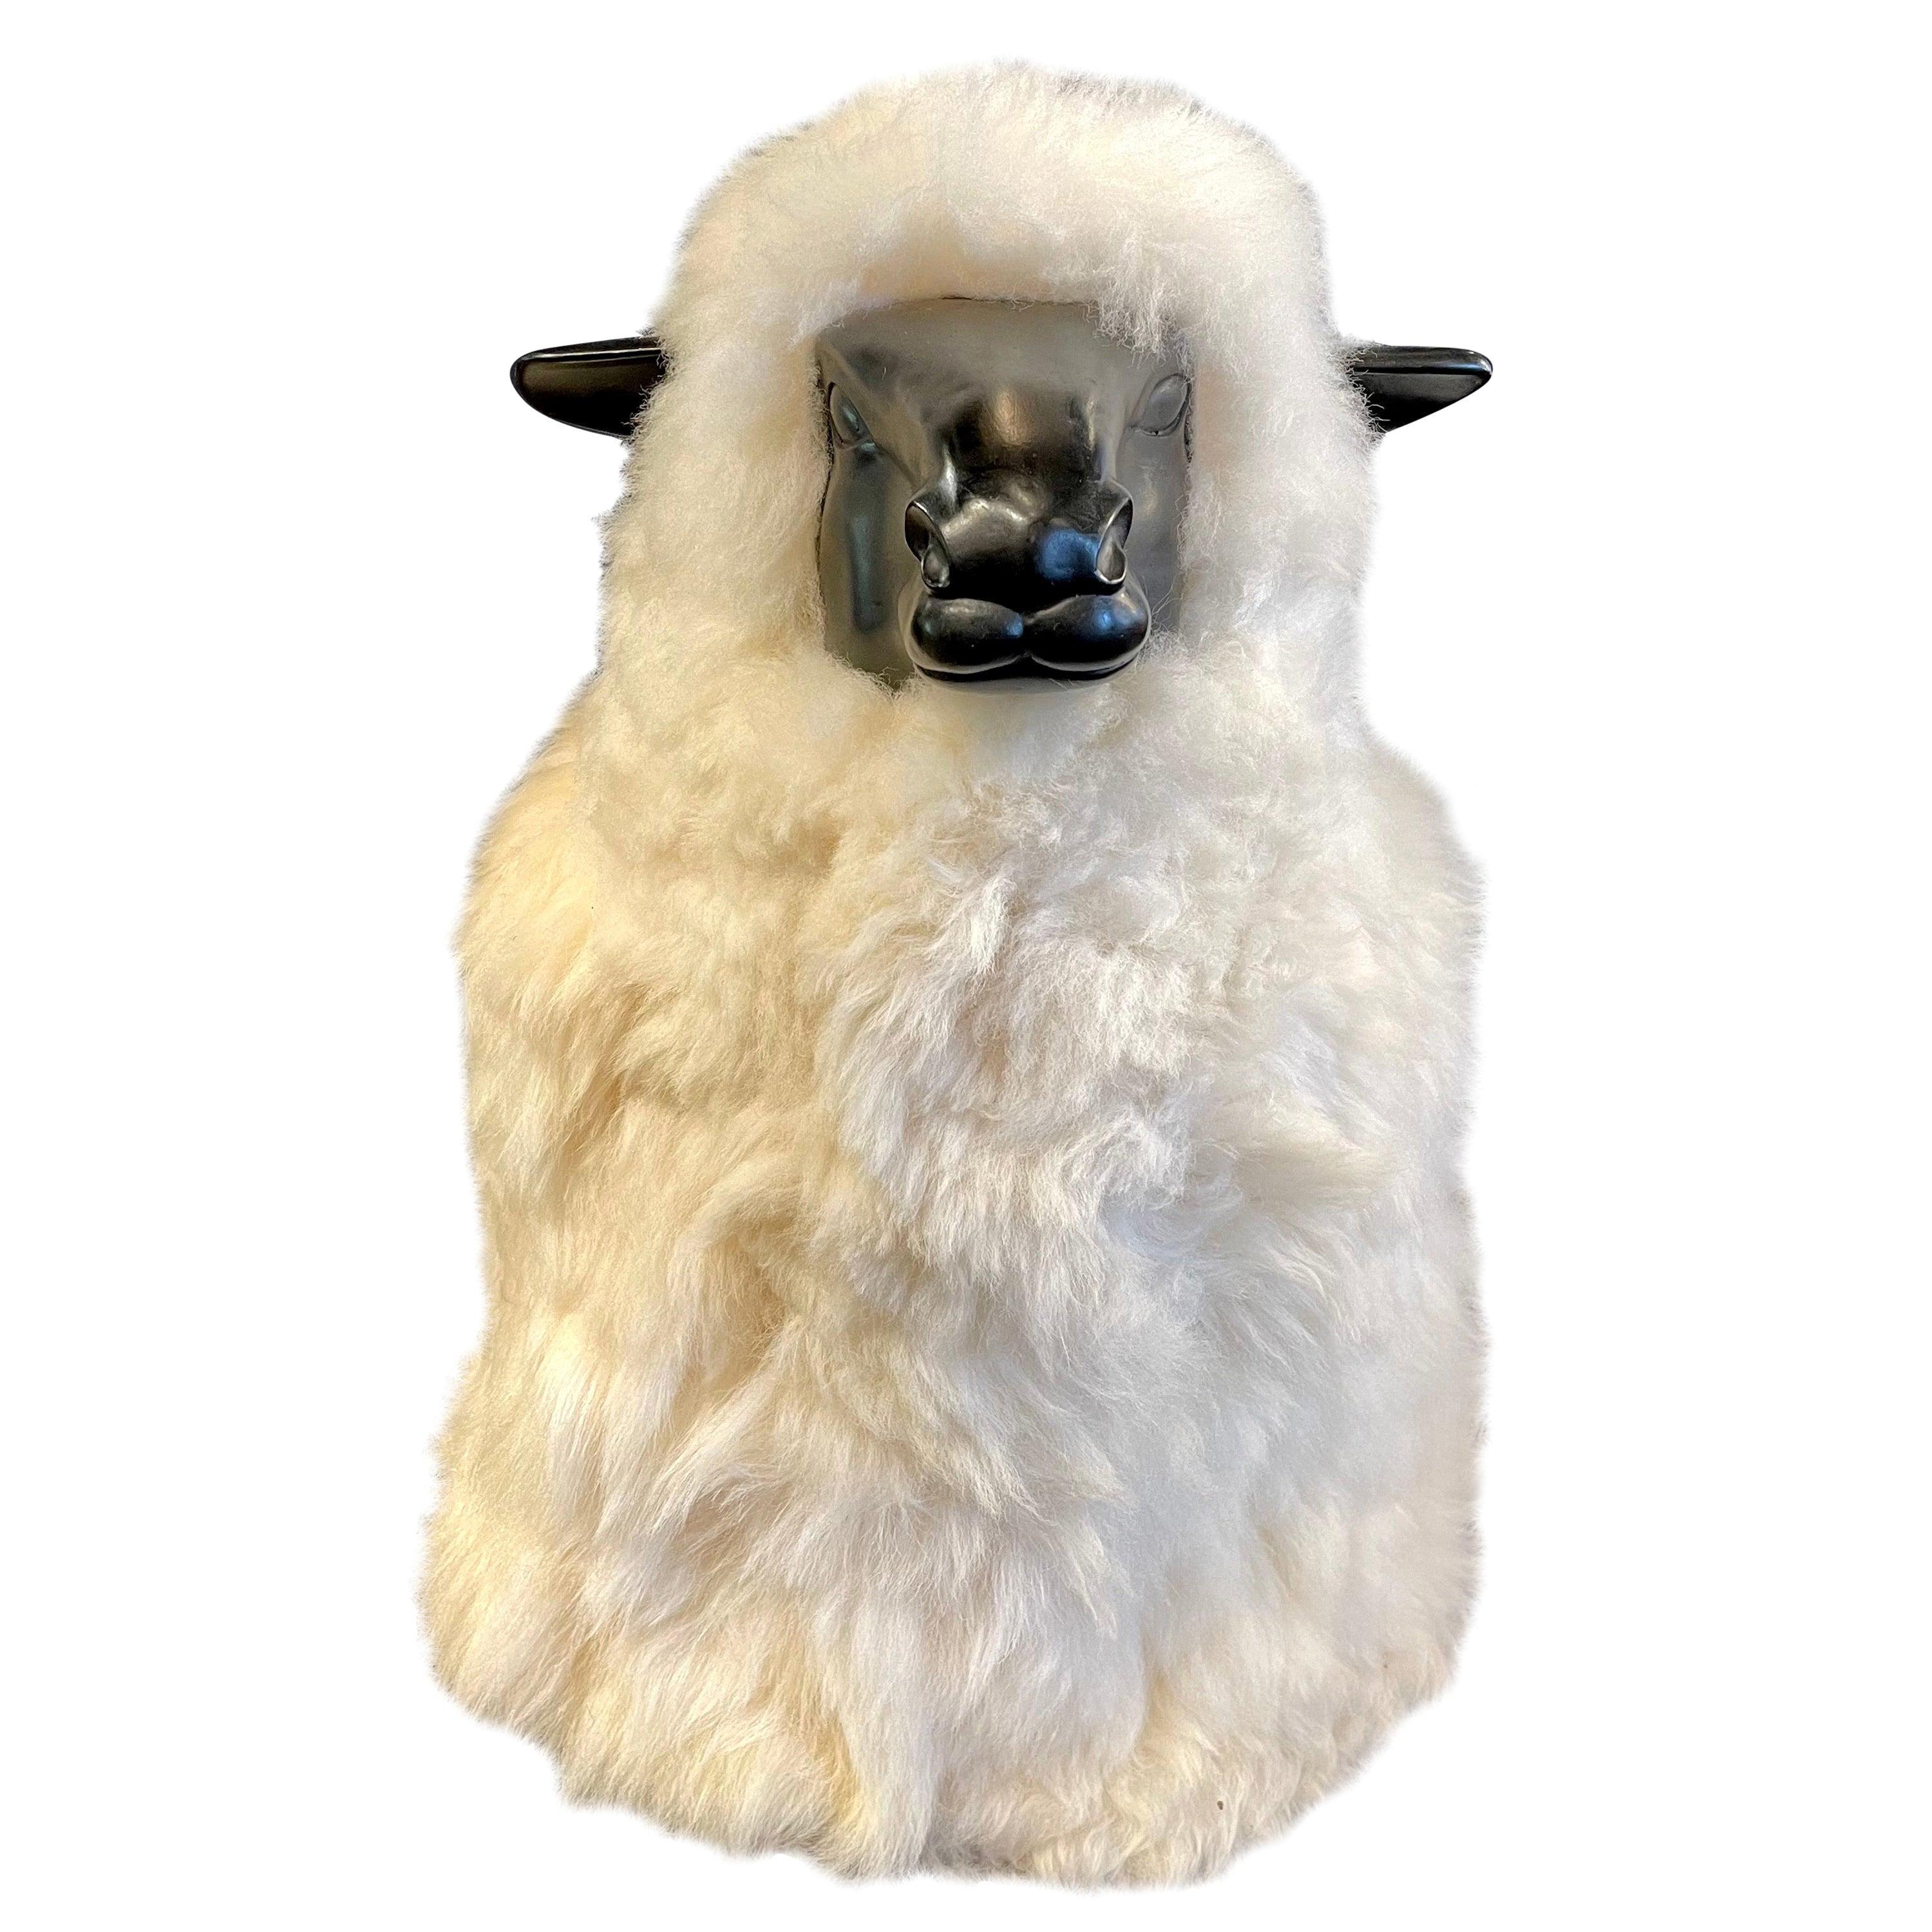 Mid-Century Modern, Sheep Sculpture, Resin, Wool, 2000 For Sale